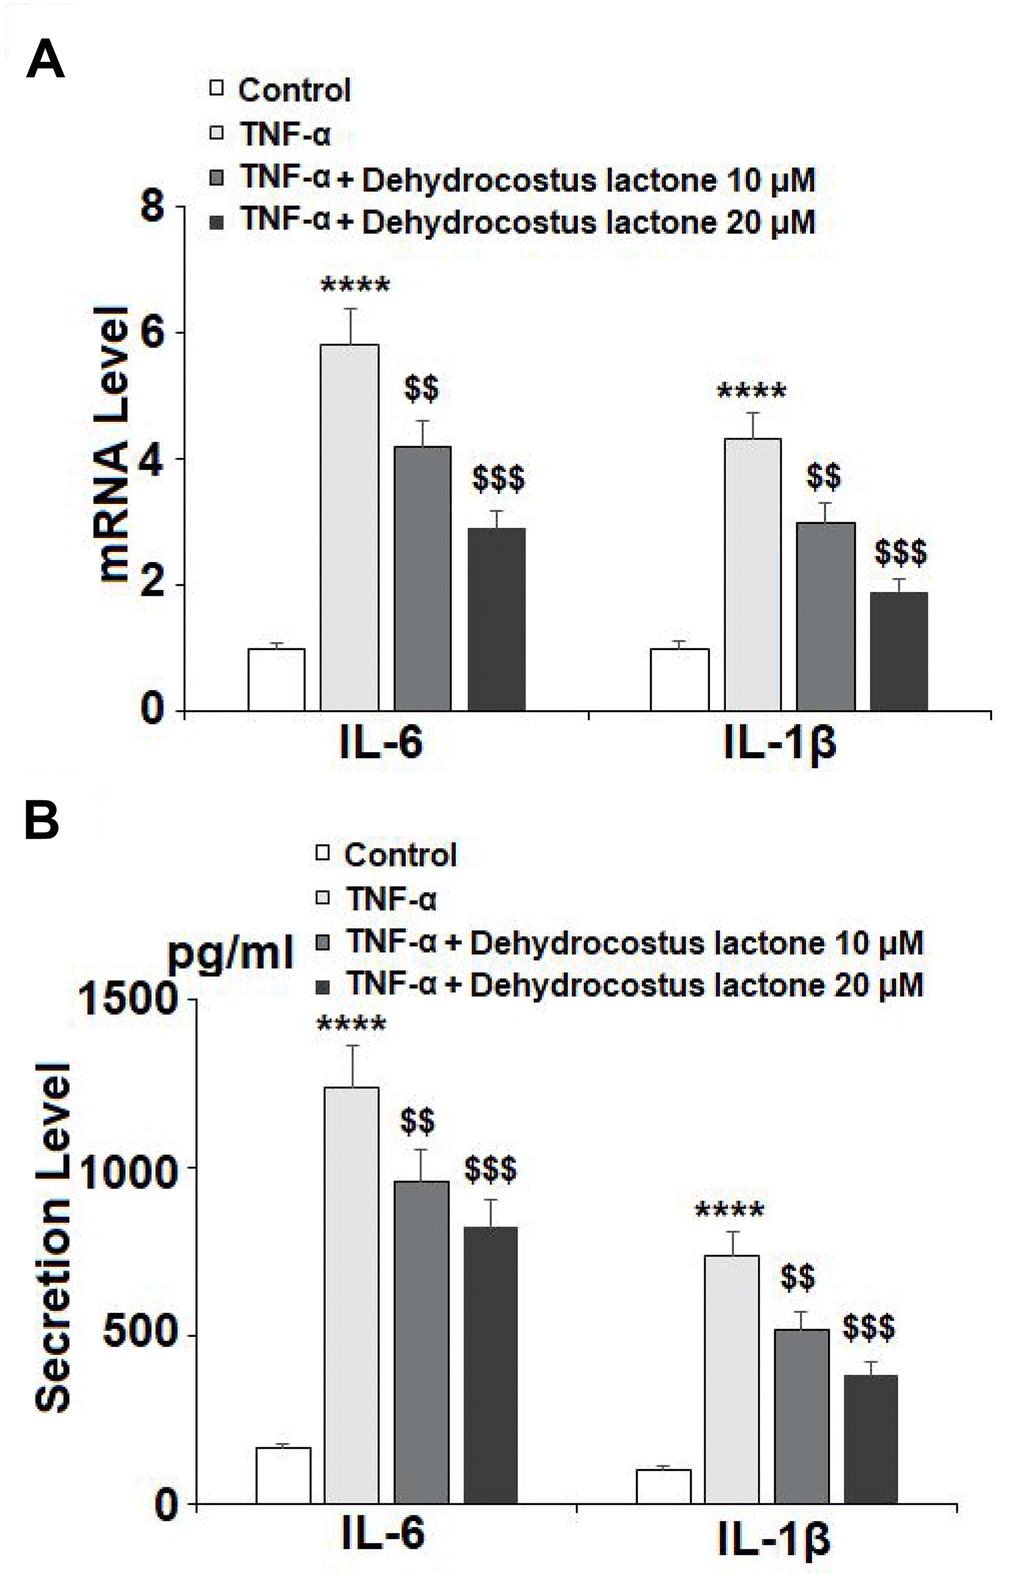 DHC prevented TNF-α-induced expression and secretion of IL-6 and IL-1β. Cells were stimulated with TNF-α (10 ng/ml) in the presence or absence of 10 and 20 μM for 24 h. (A). mRNA of IL-6 and IL-1β as measured by real-time PCR; (B). Secretion of IL-6 and IL-1β as measured by ELISA (****, P